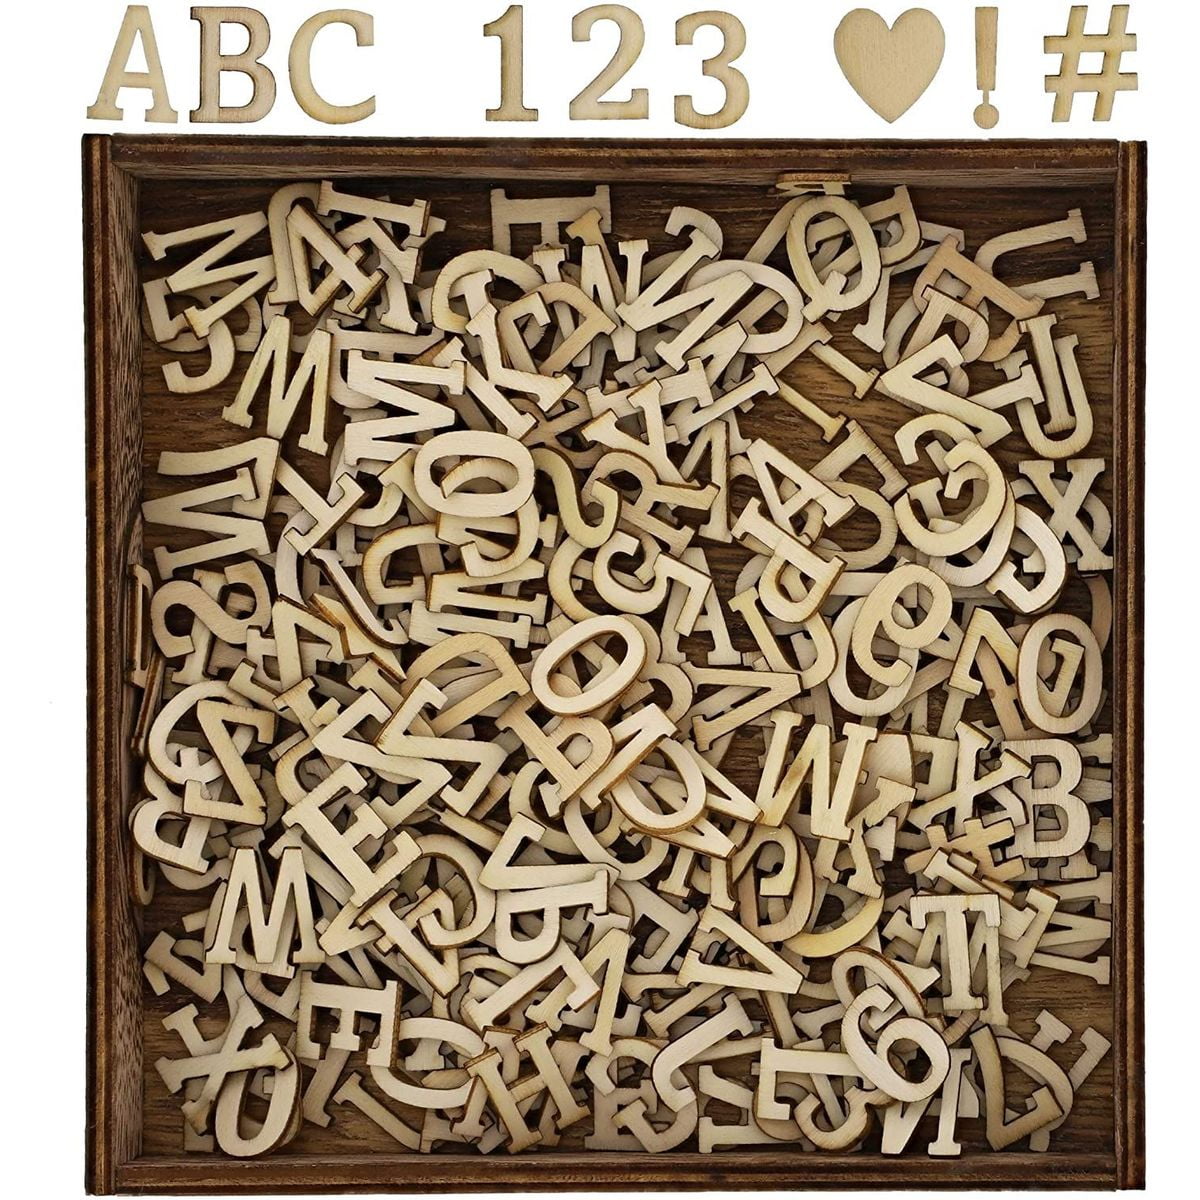 Wooden Board Large Alphabets and Numbers Symbol A-Z, 0-9 